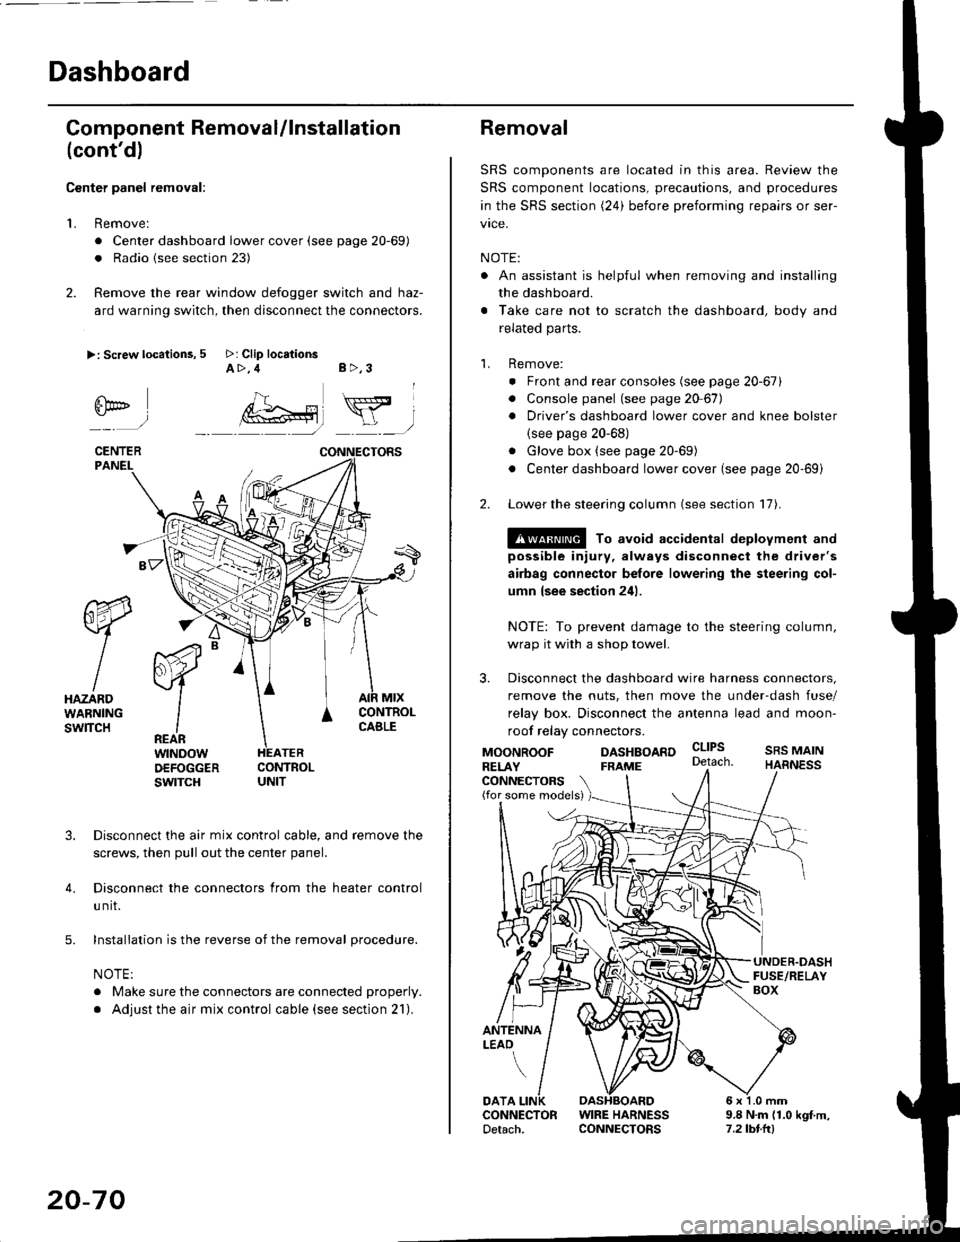 HONDA CIVIC 1998 6.G Workshop Manual Dashboard
Gomponent Removal/lnstallation
(contd)
Center panel removal:
1. Remove:
. Center dashboard lower cover (see page 20-69)
. Radio {see section 23)
2. Remove the rear window defogger switch an